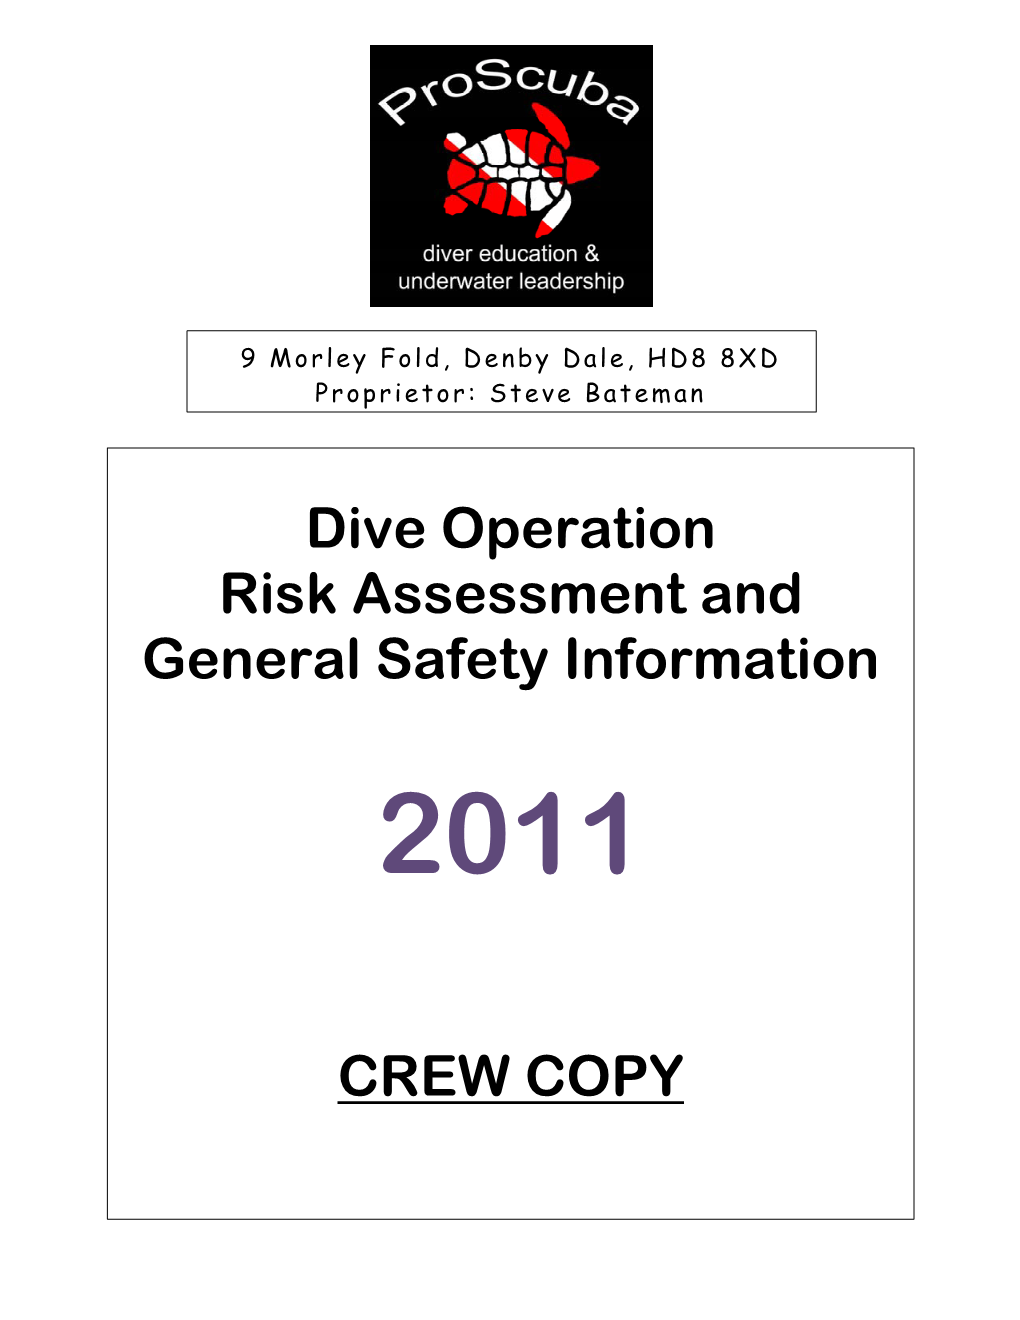 Dive Operation Risk Assessment and General Safety Information